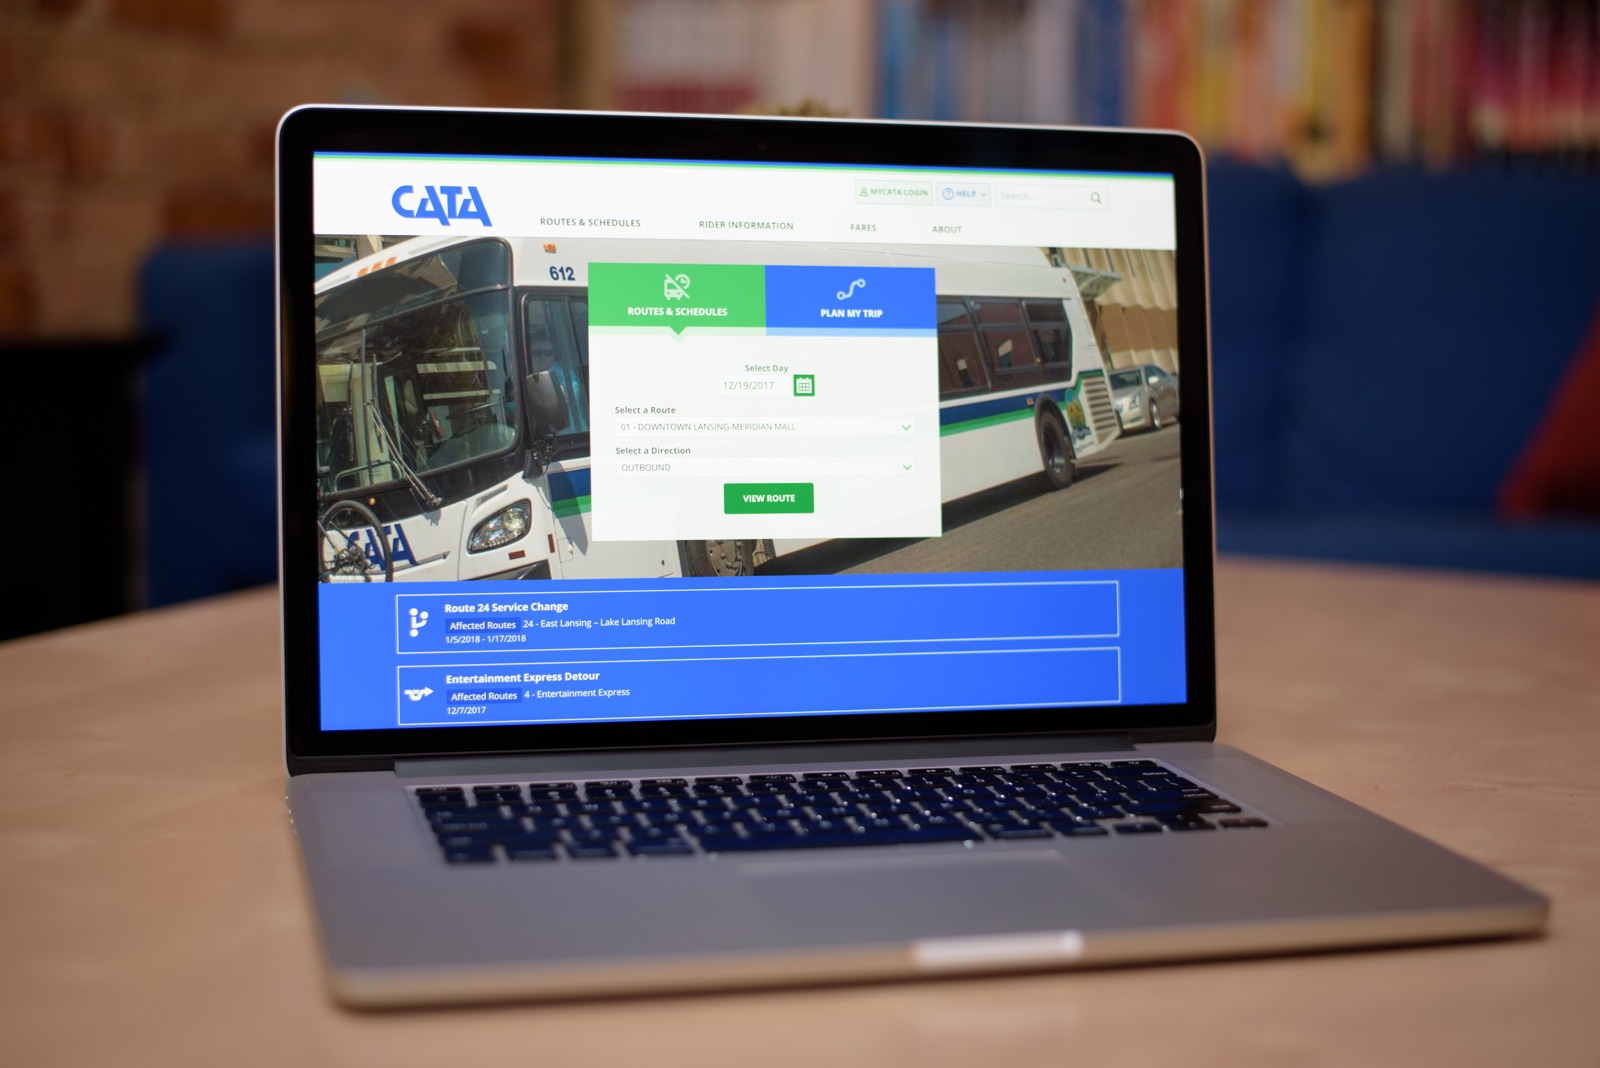 The CATA website on a laptop computer